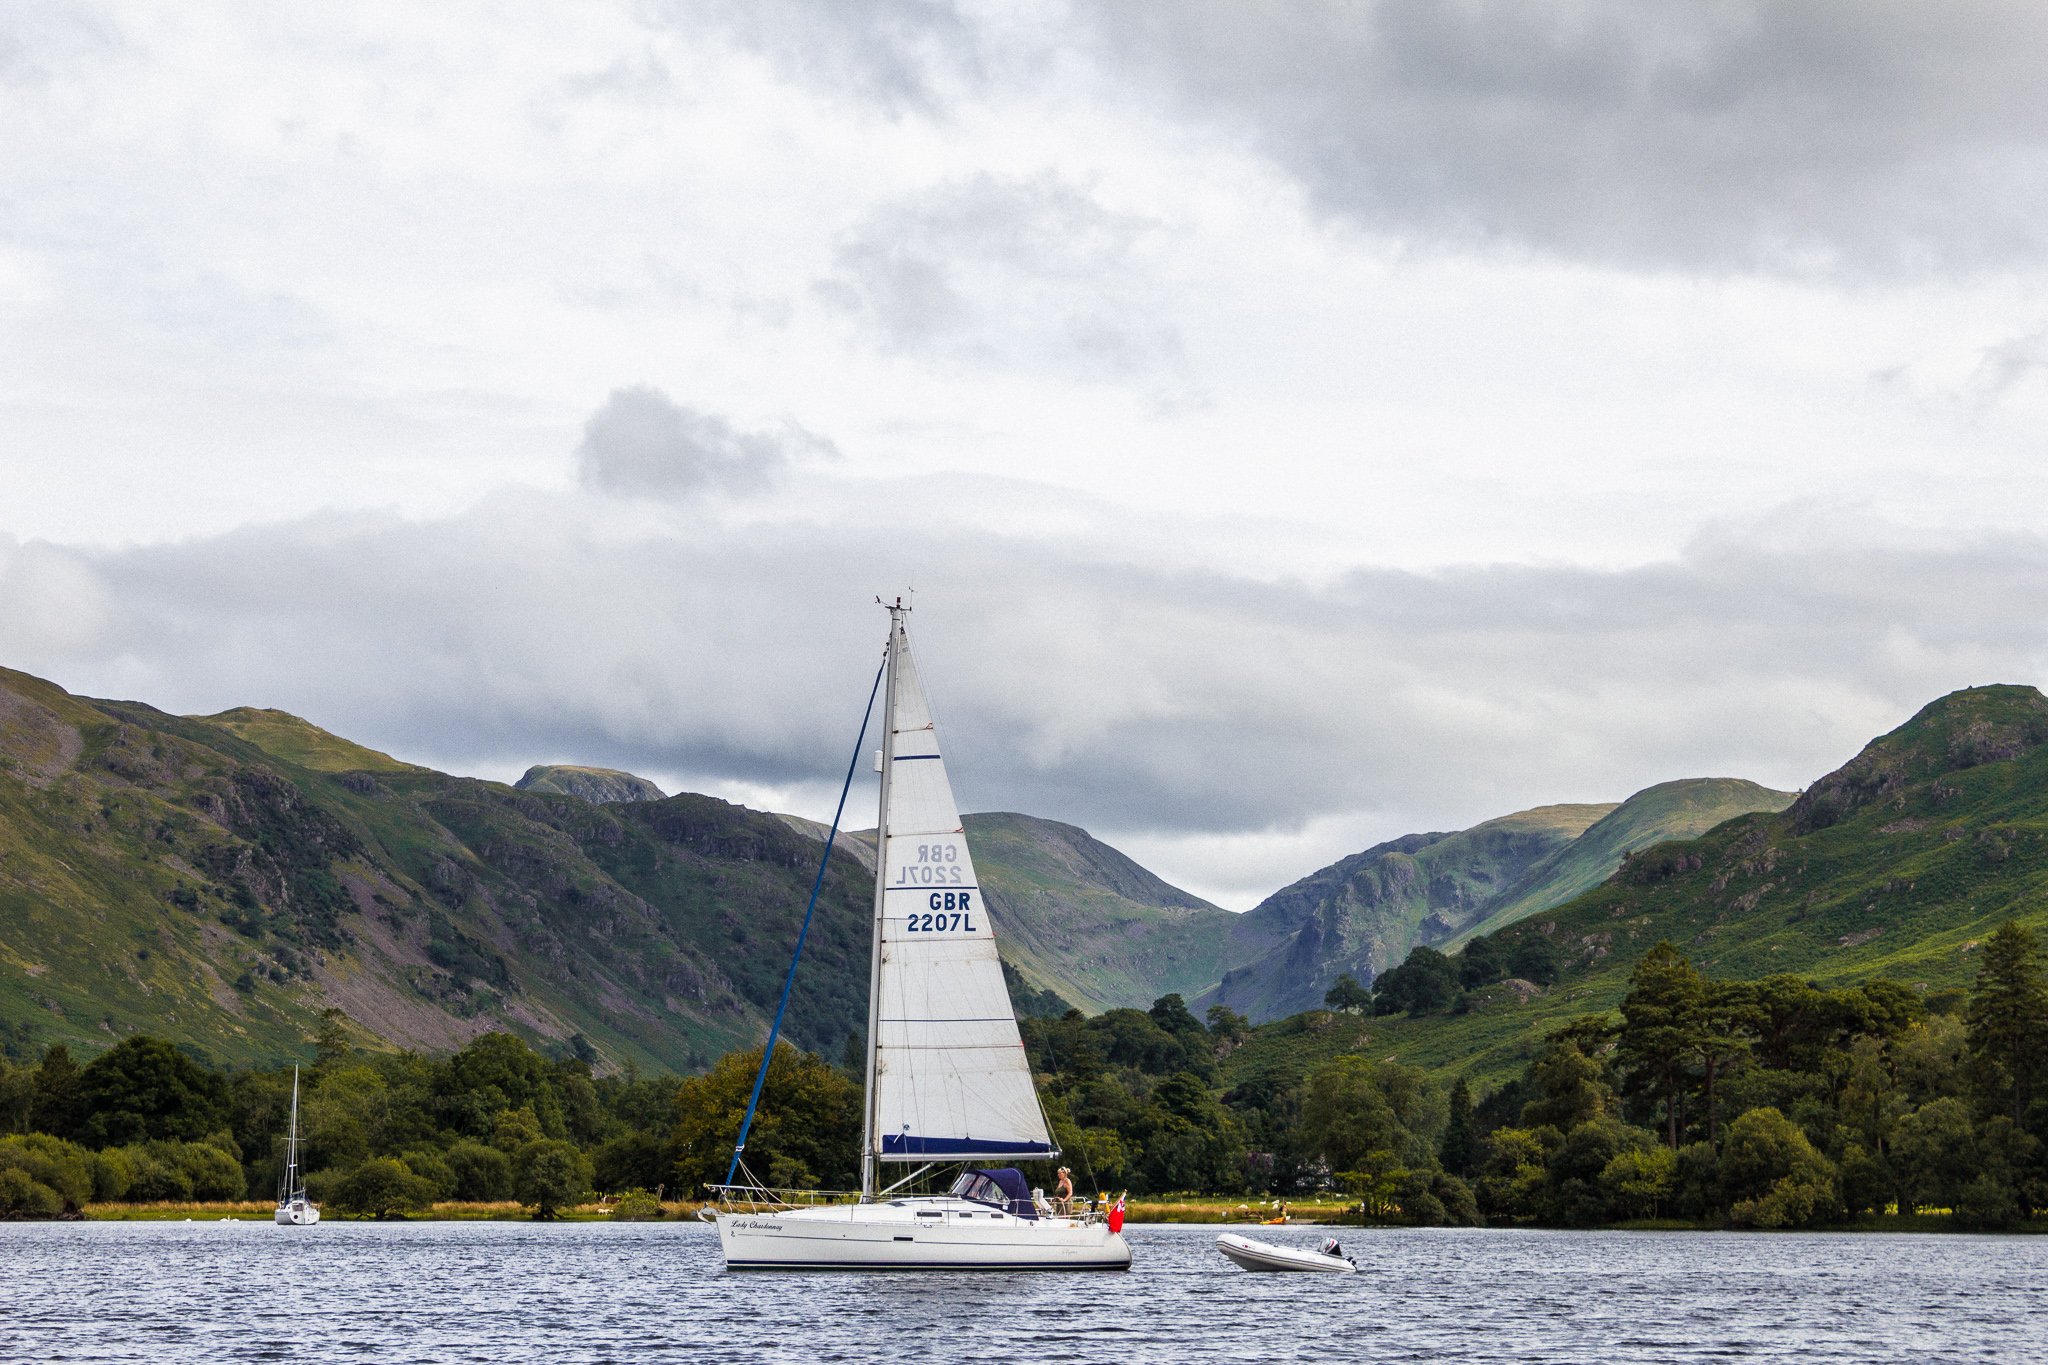 Ullswater in the lake district